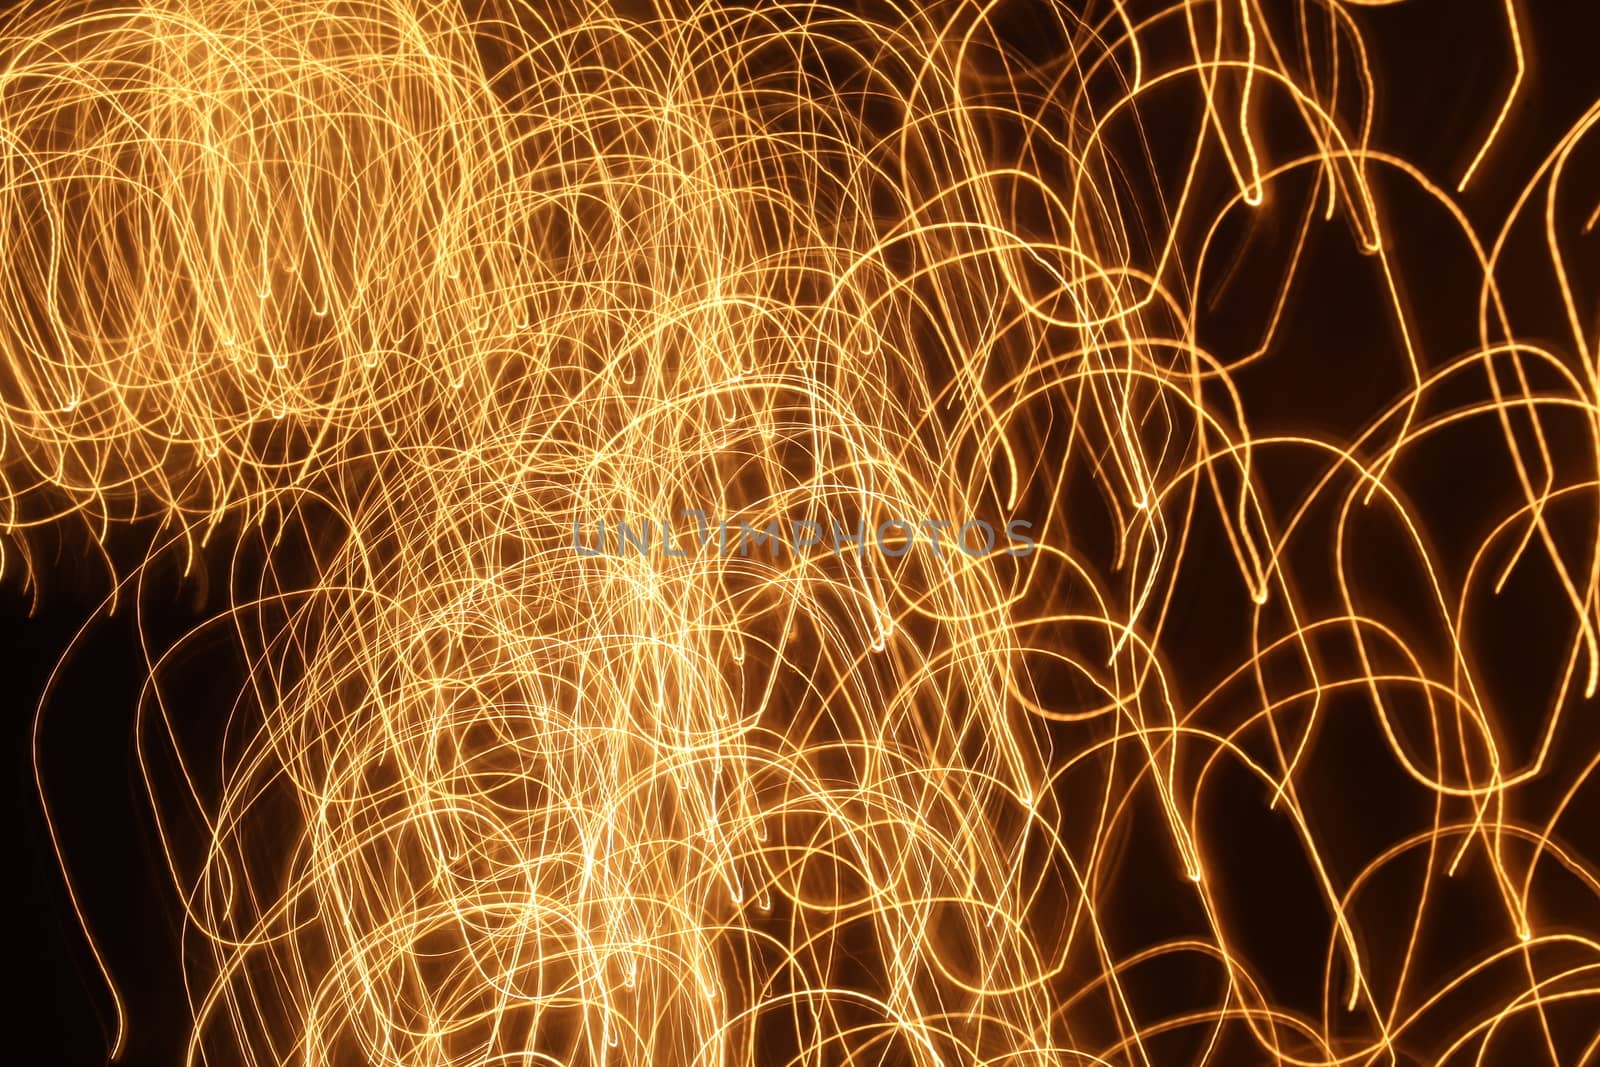 Abstract slow shutter lights